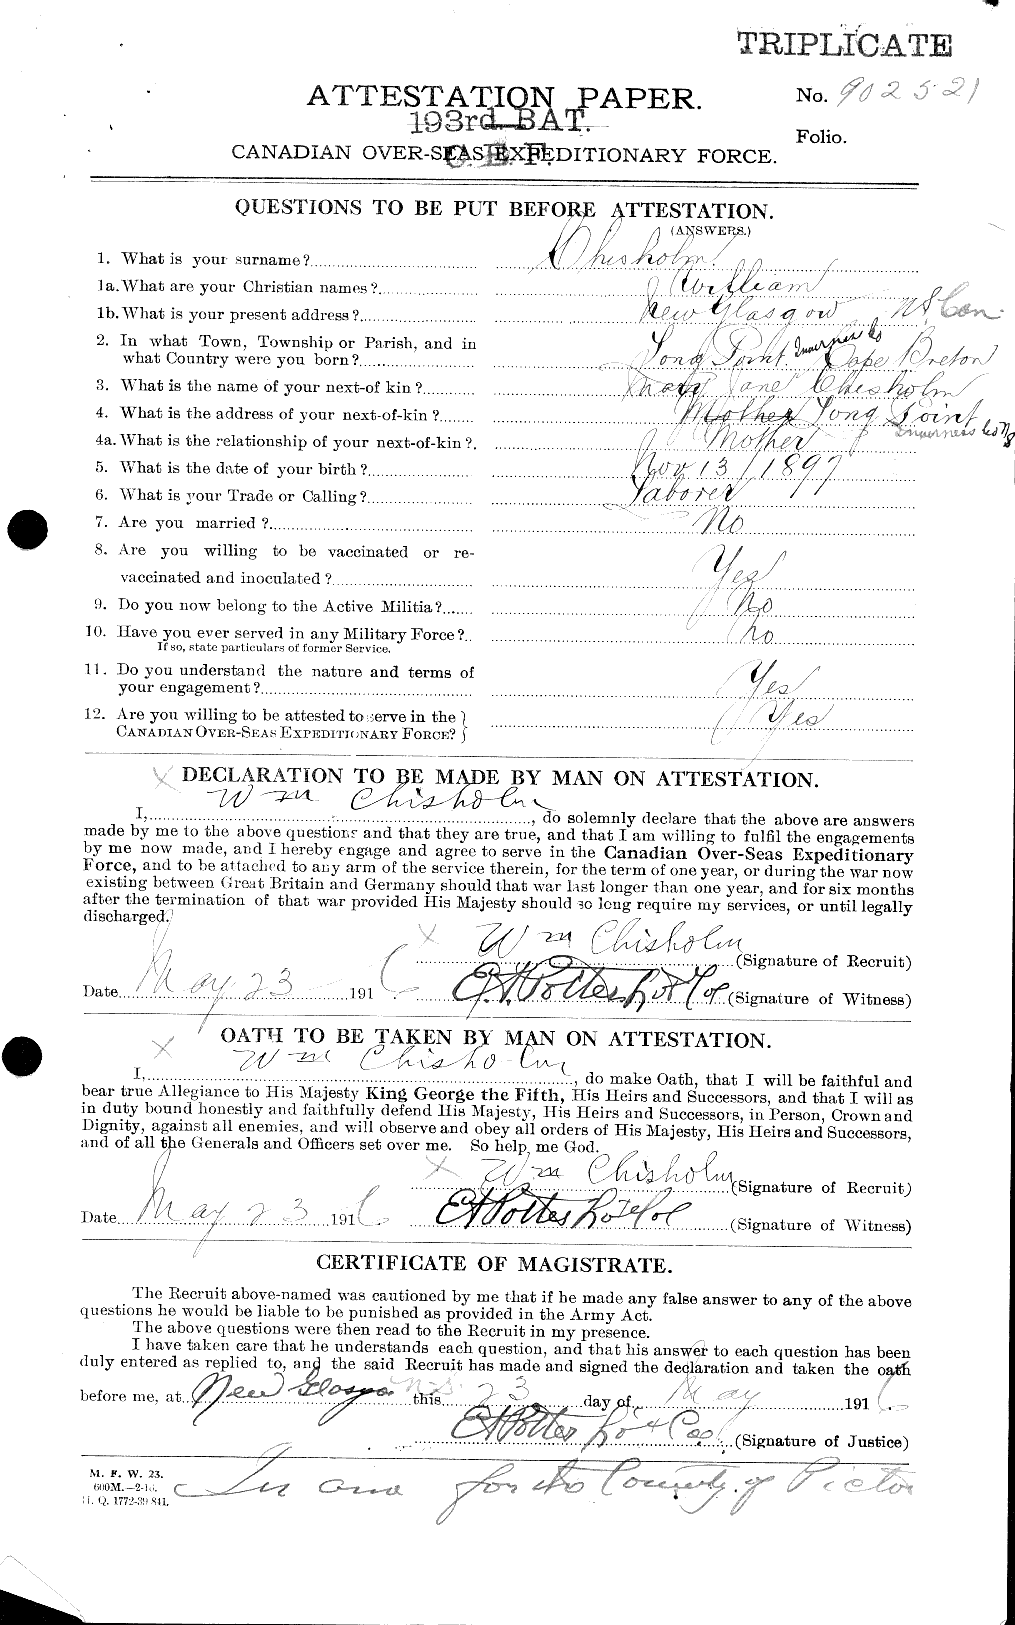 Personnel Records of the First World War - CEF 020355a